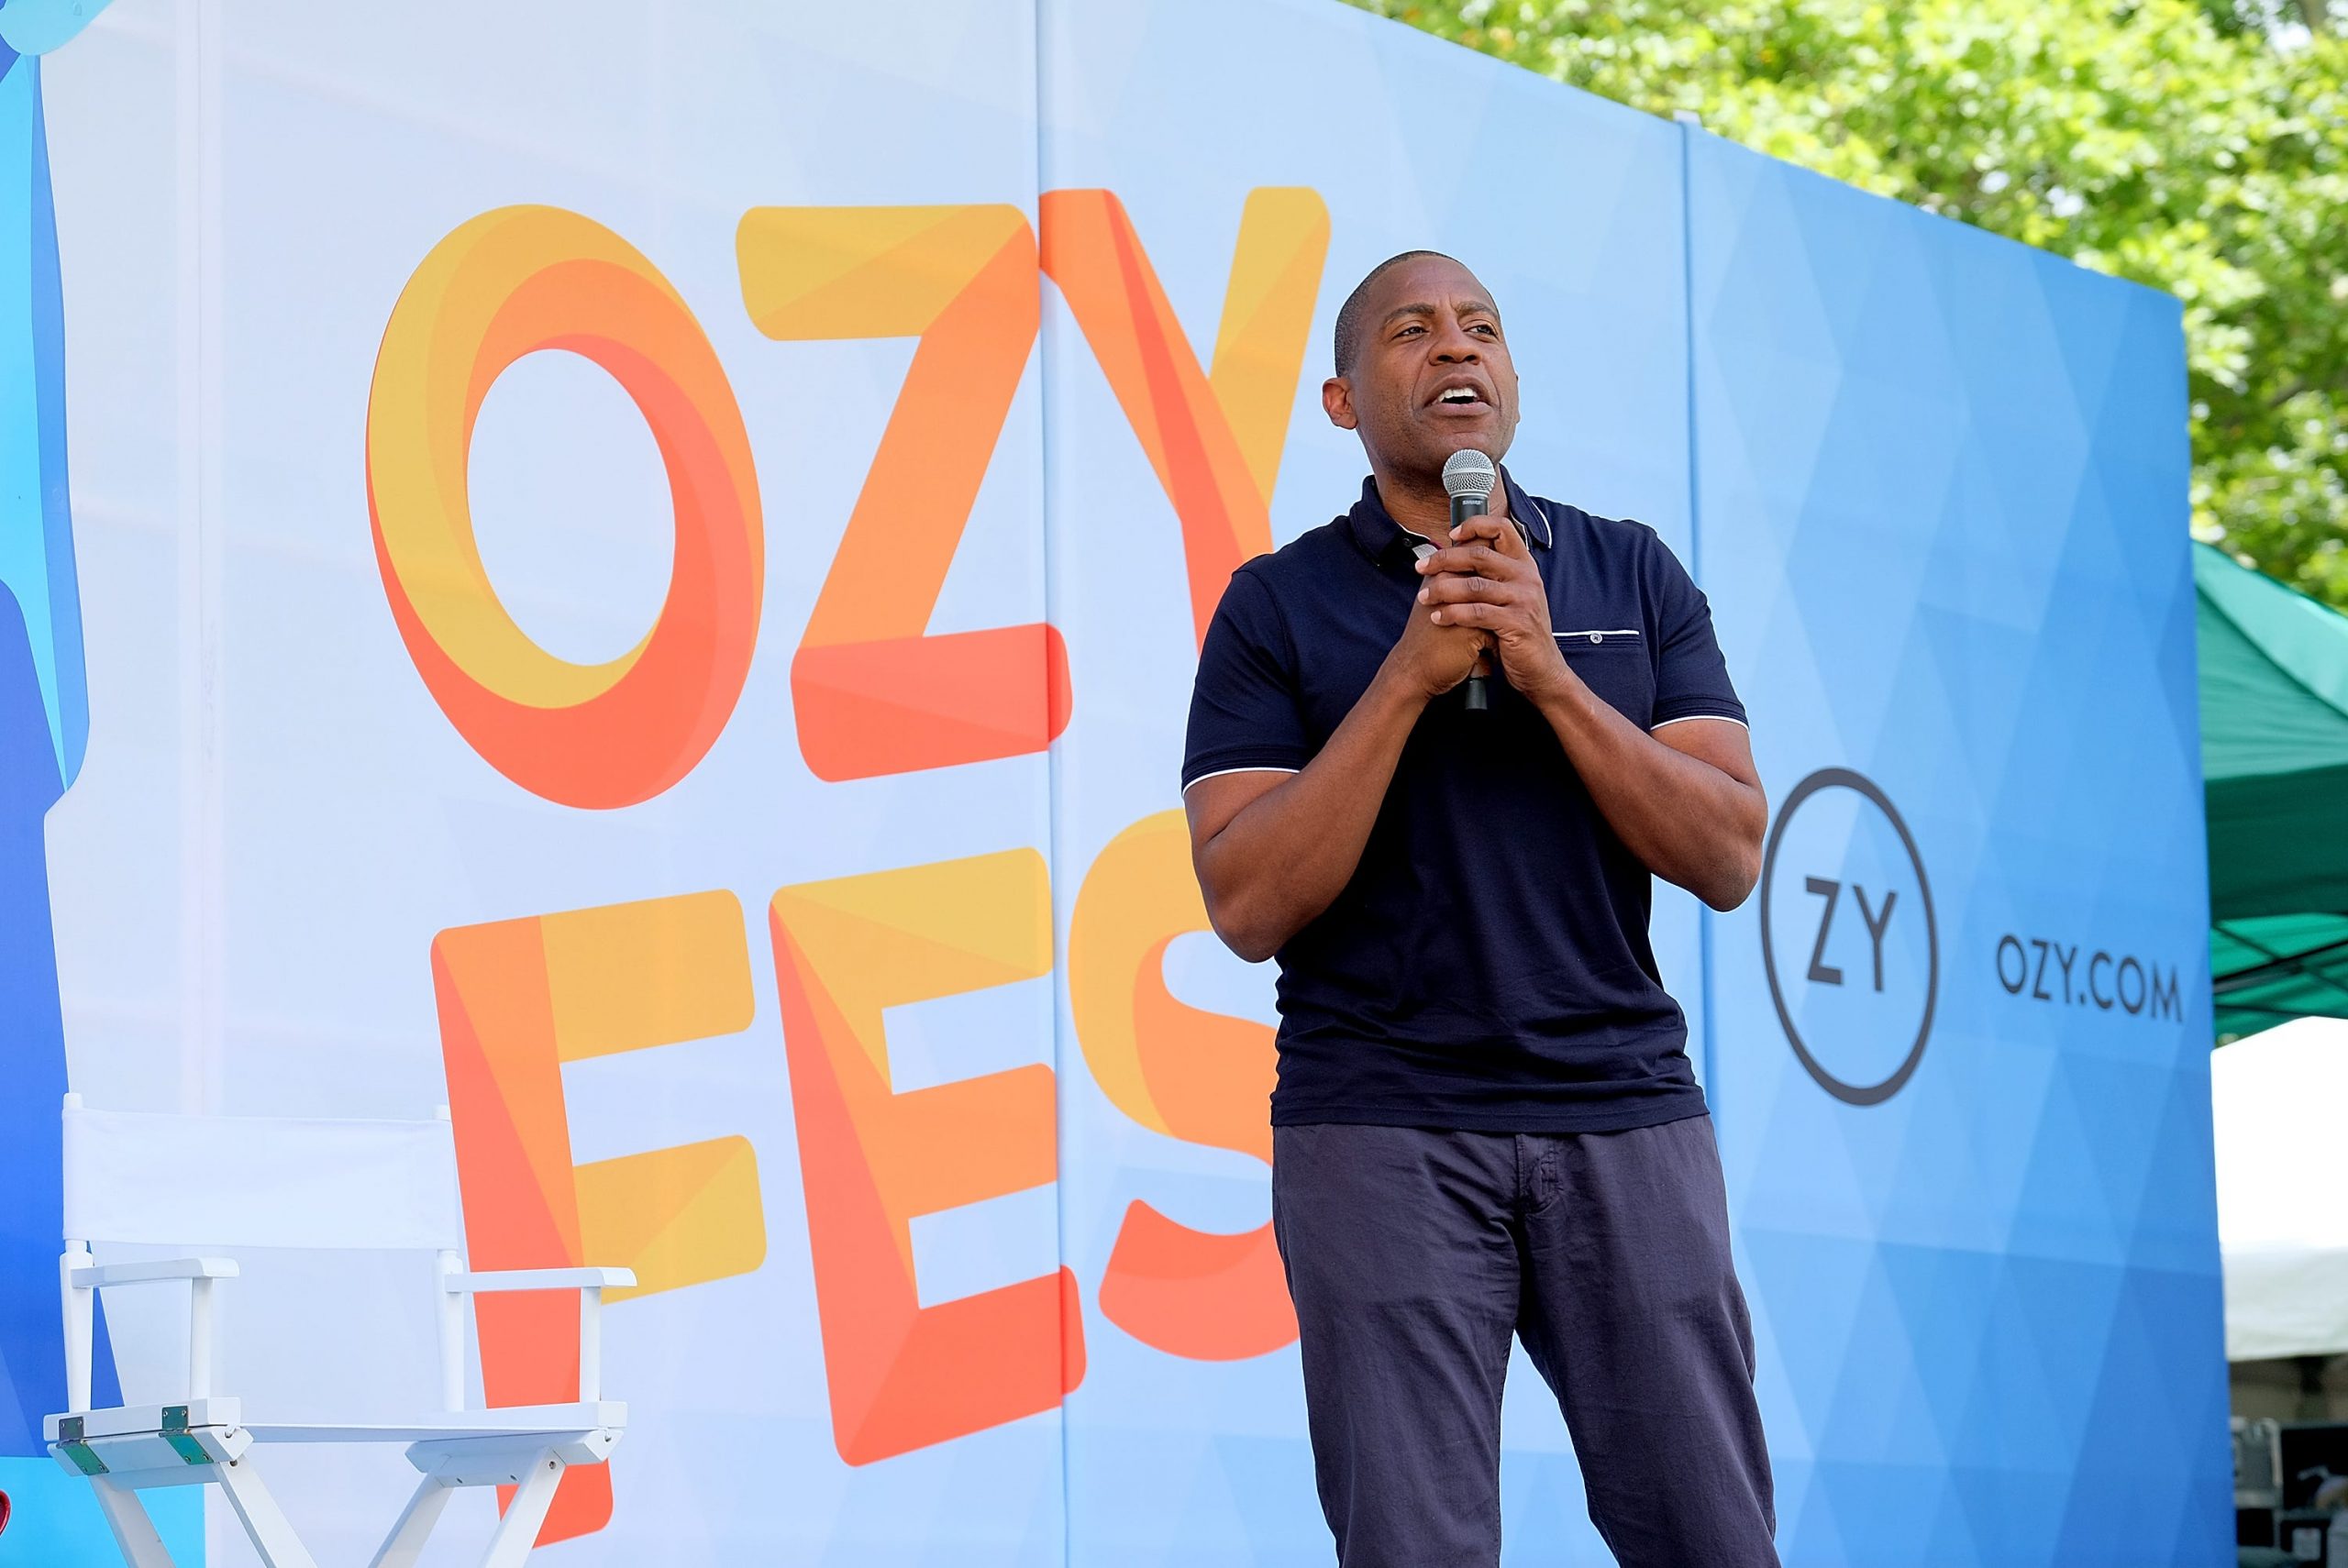 Carlos Watson speaks onstage during OZY FEST 2018 at Rumsey Playfield, Central Park on July 21, 2018 in New York City.